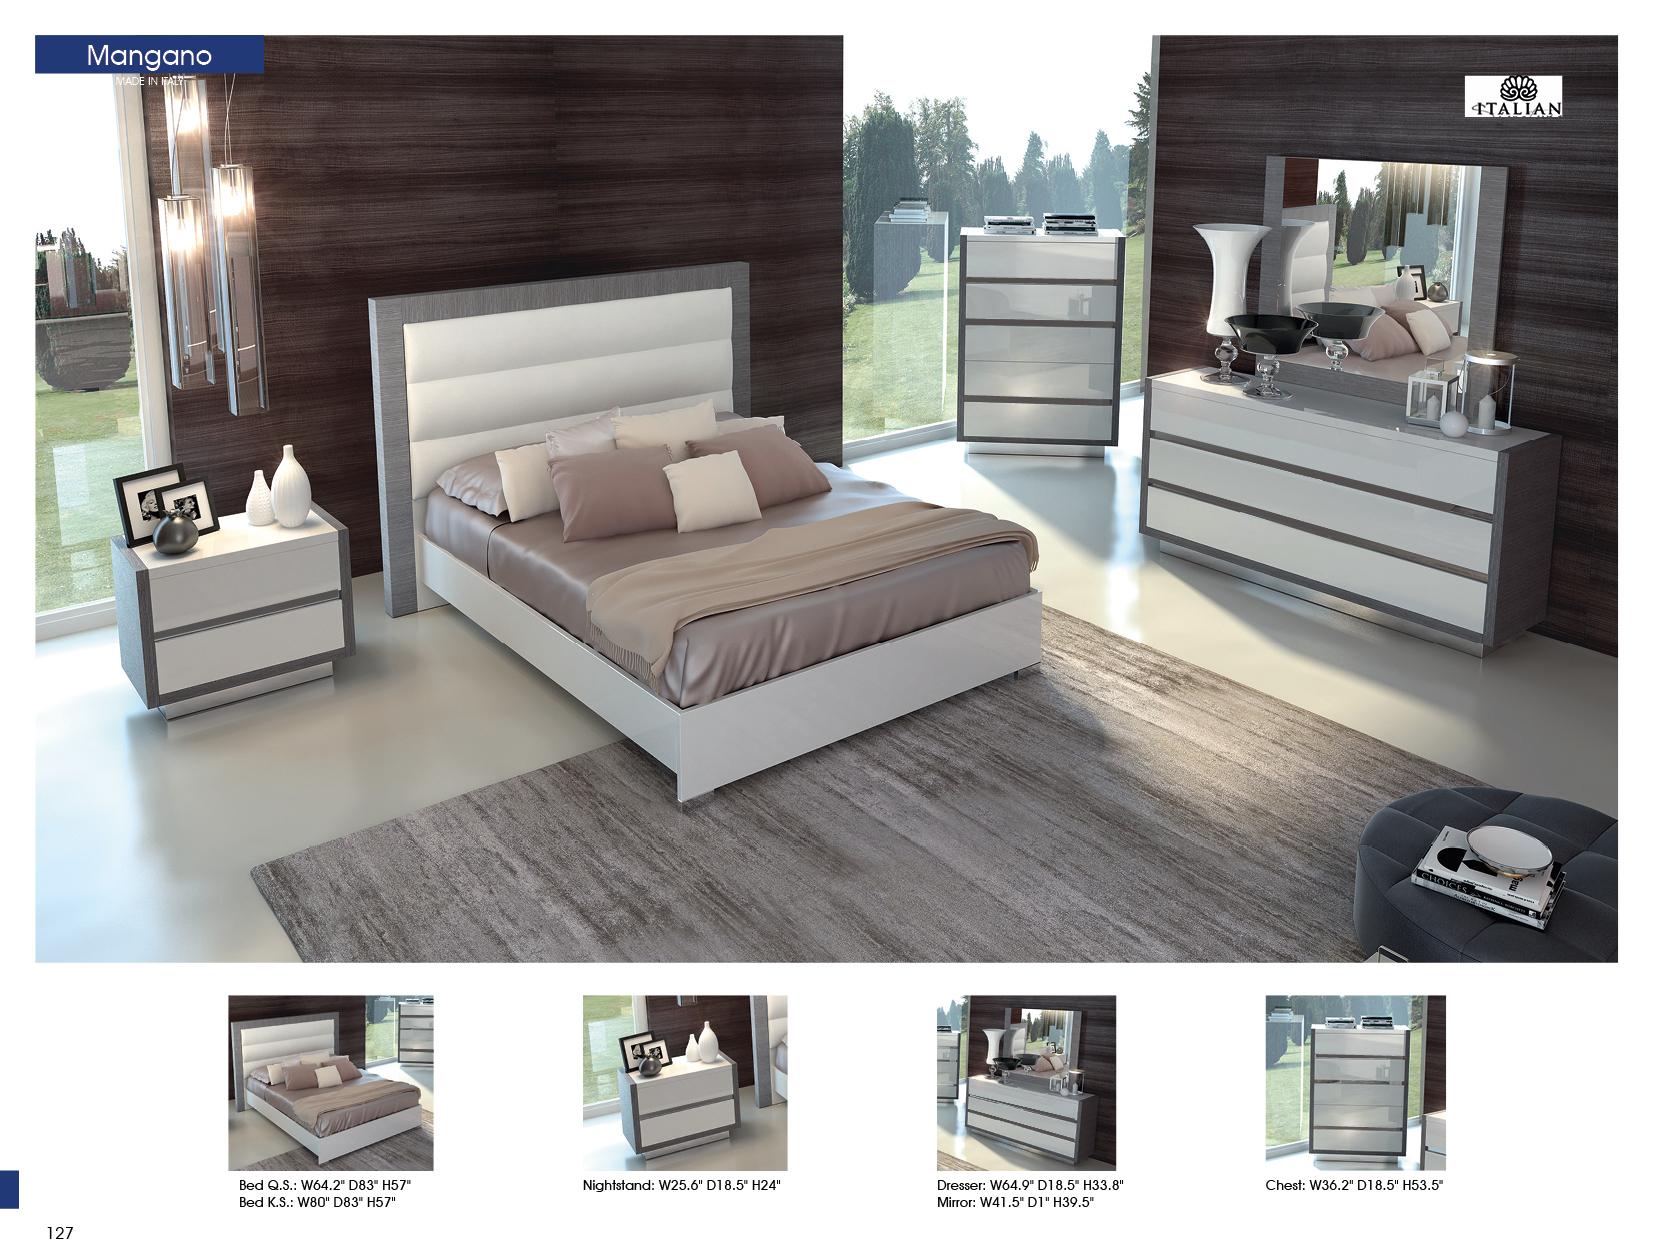 

    
ESF-Mangano-EK-2N-3PC Glossy White Silver King Bedroom Set 3Ps Contemporary Made in Italy ESF Mangano
